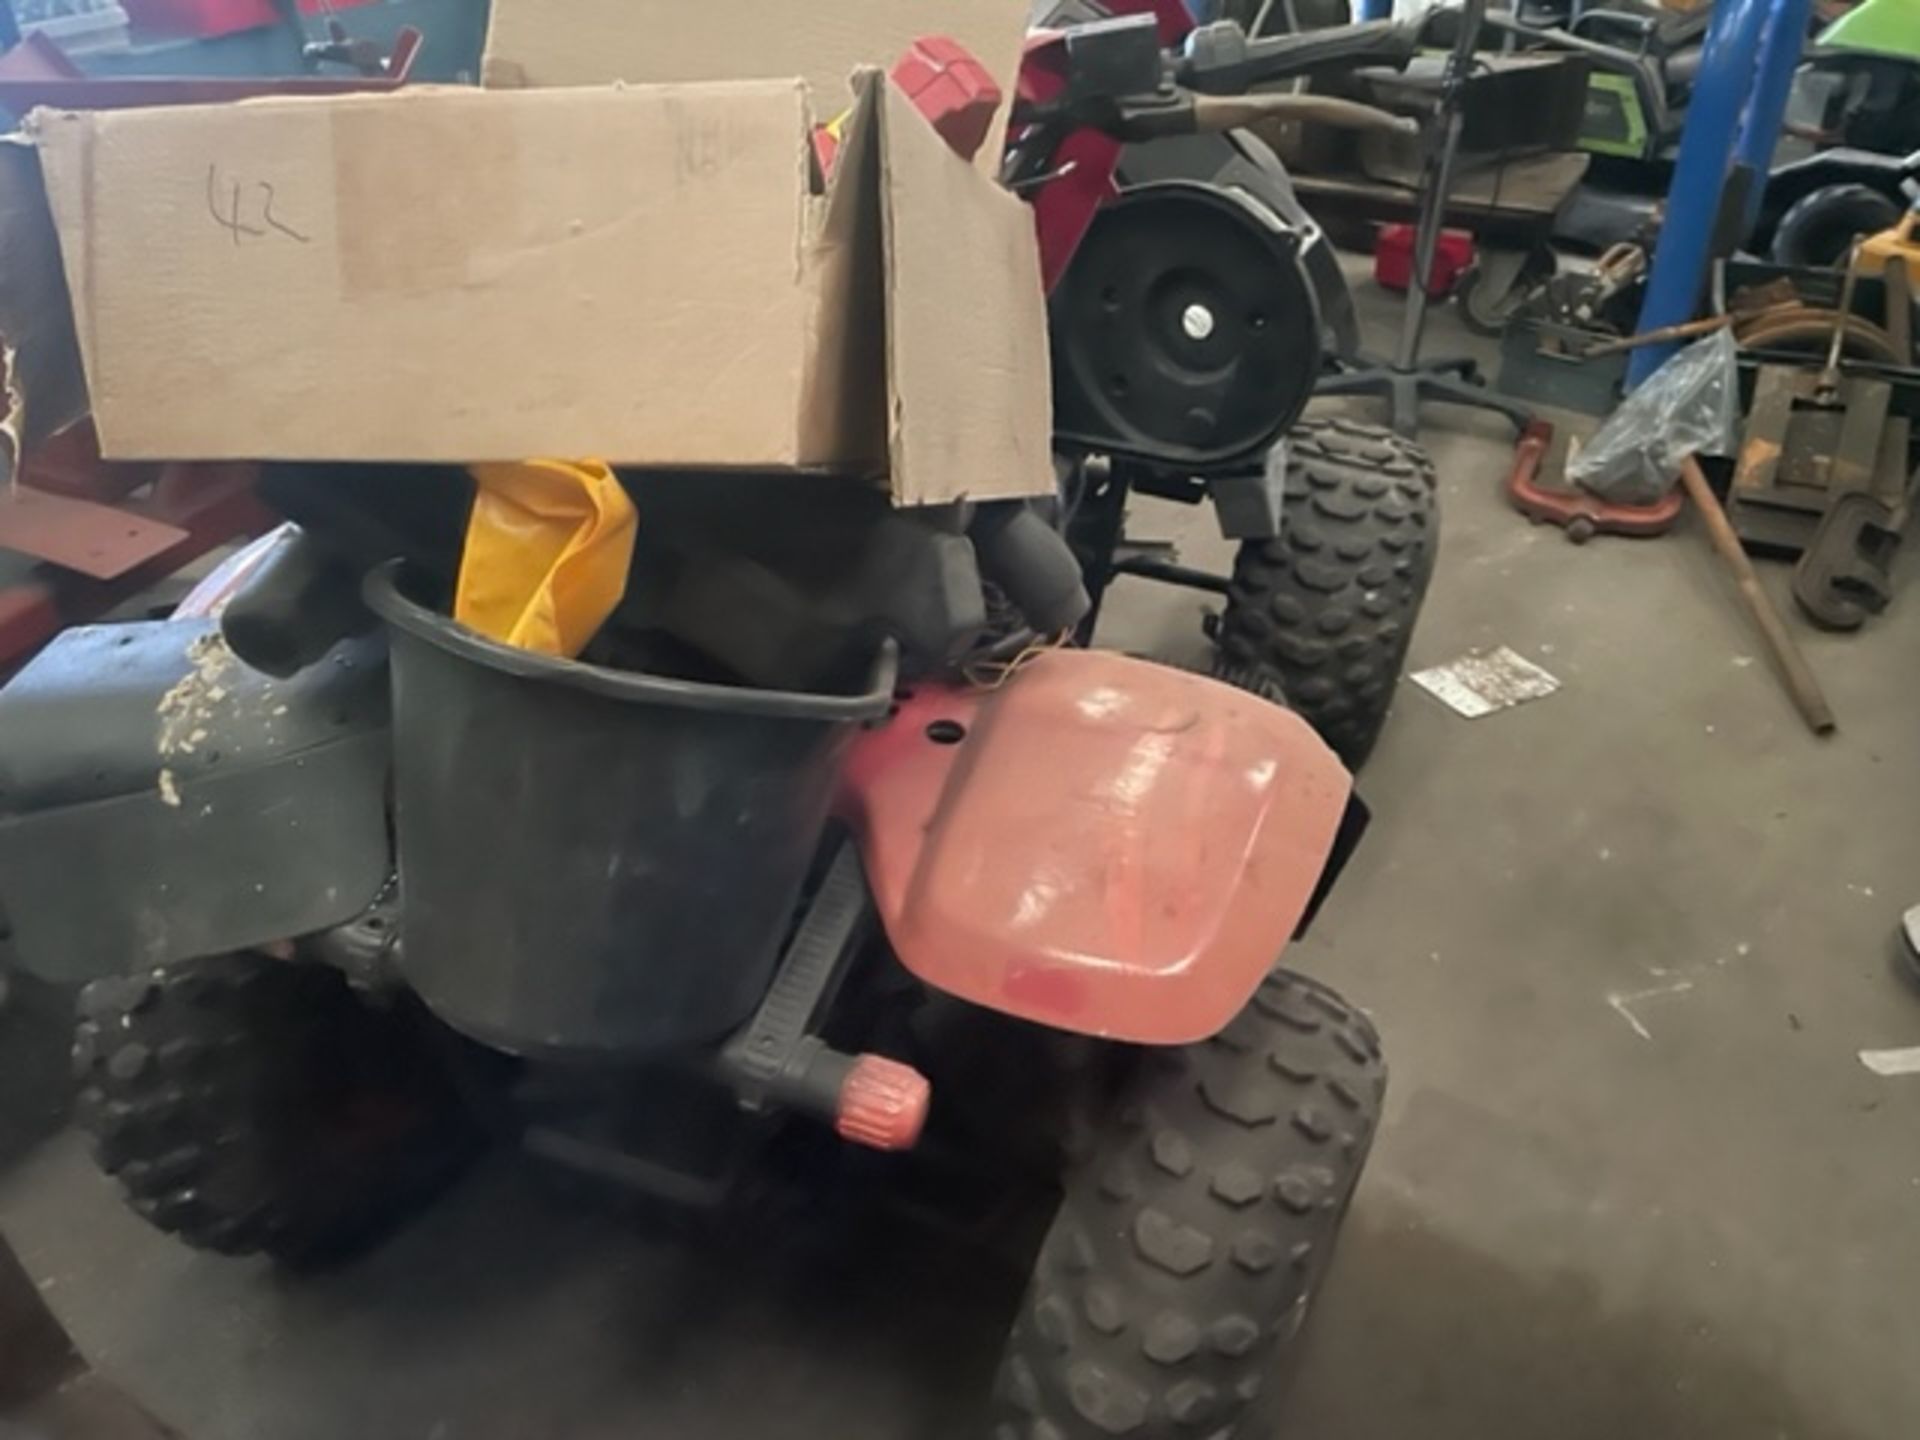 Polaris 250 2 stroke quad bike in bits as it needs a piston storey is I bought a piston but the